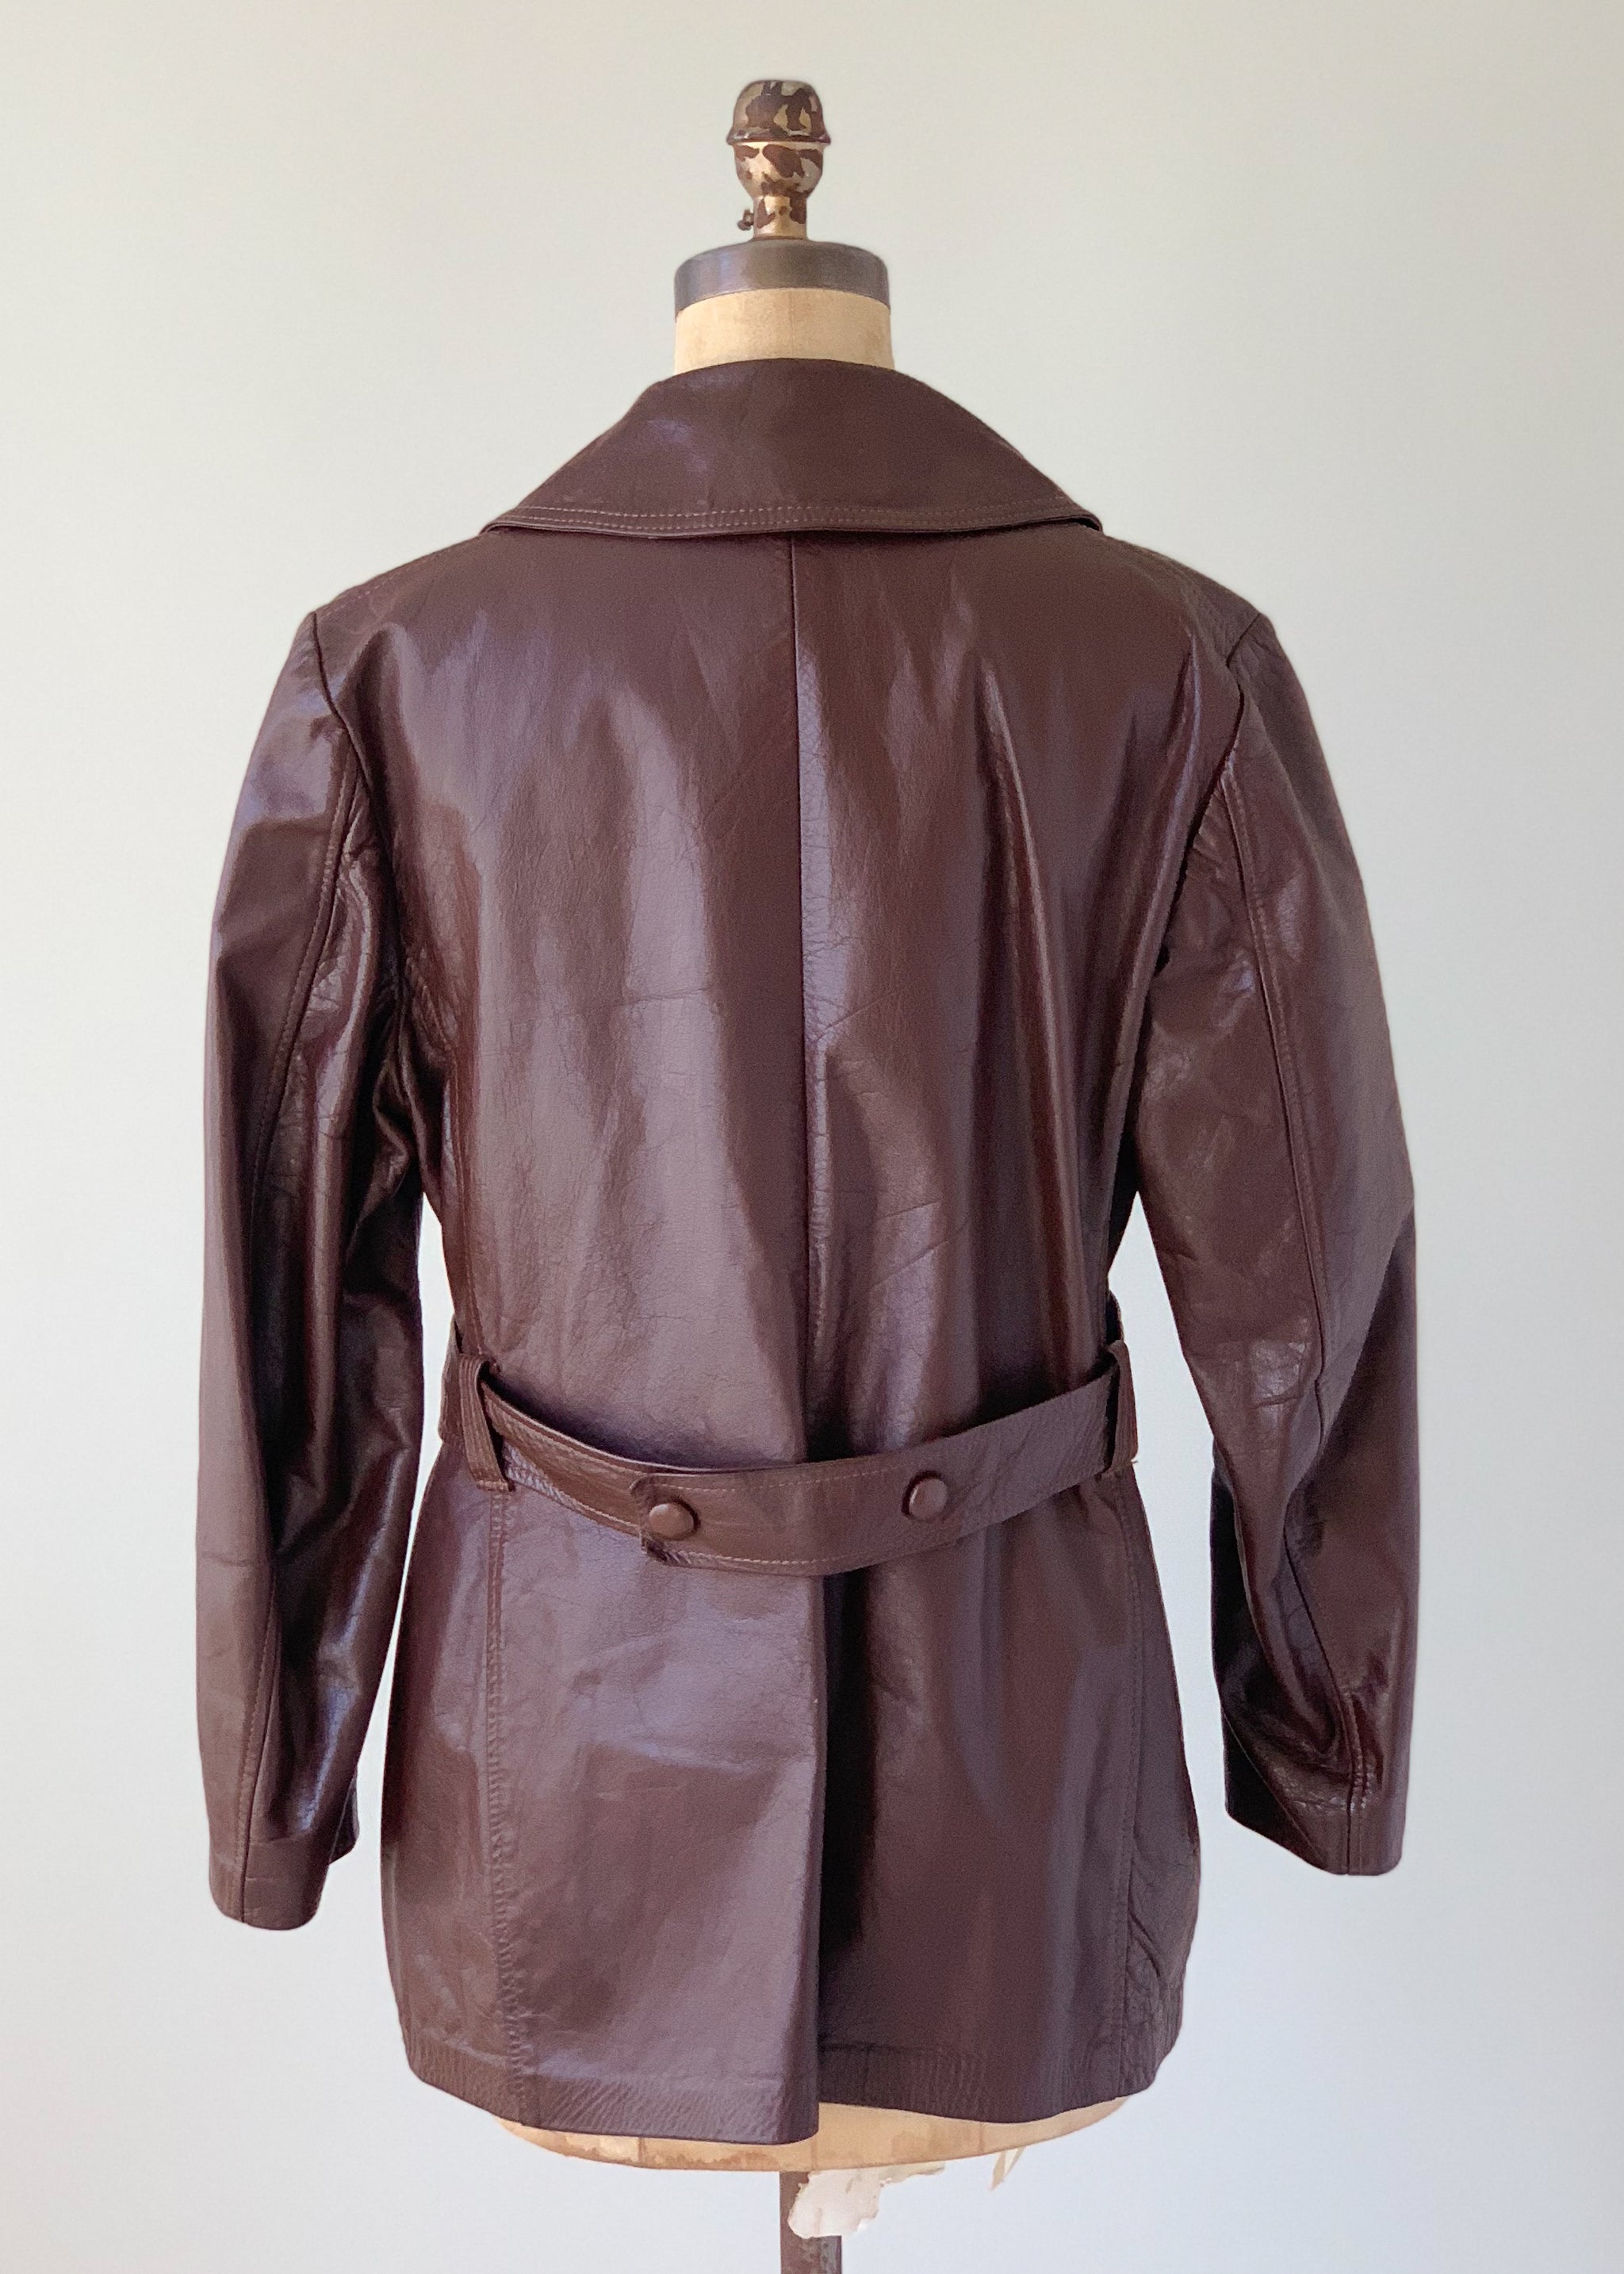 Vintage 1960s Leather Car Length Trench Coat - Raleigh Vintage